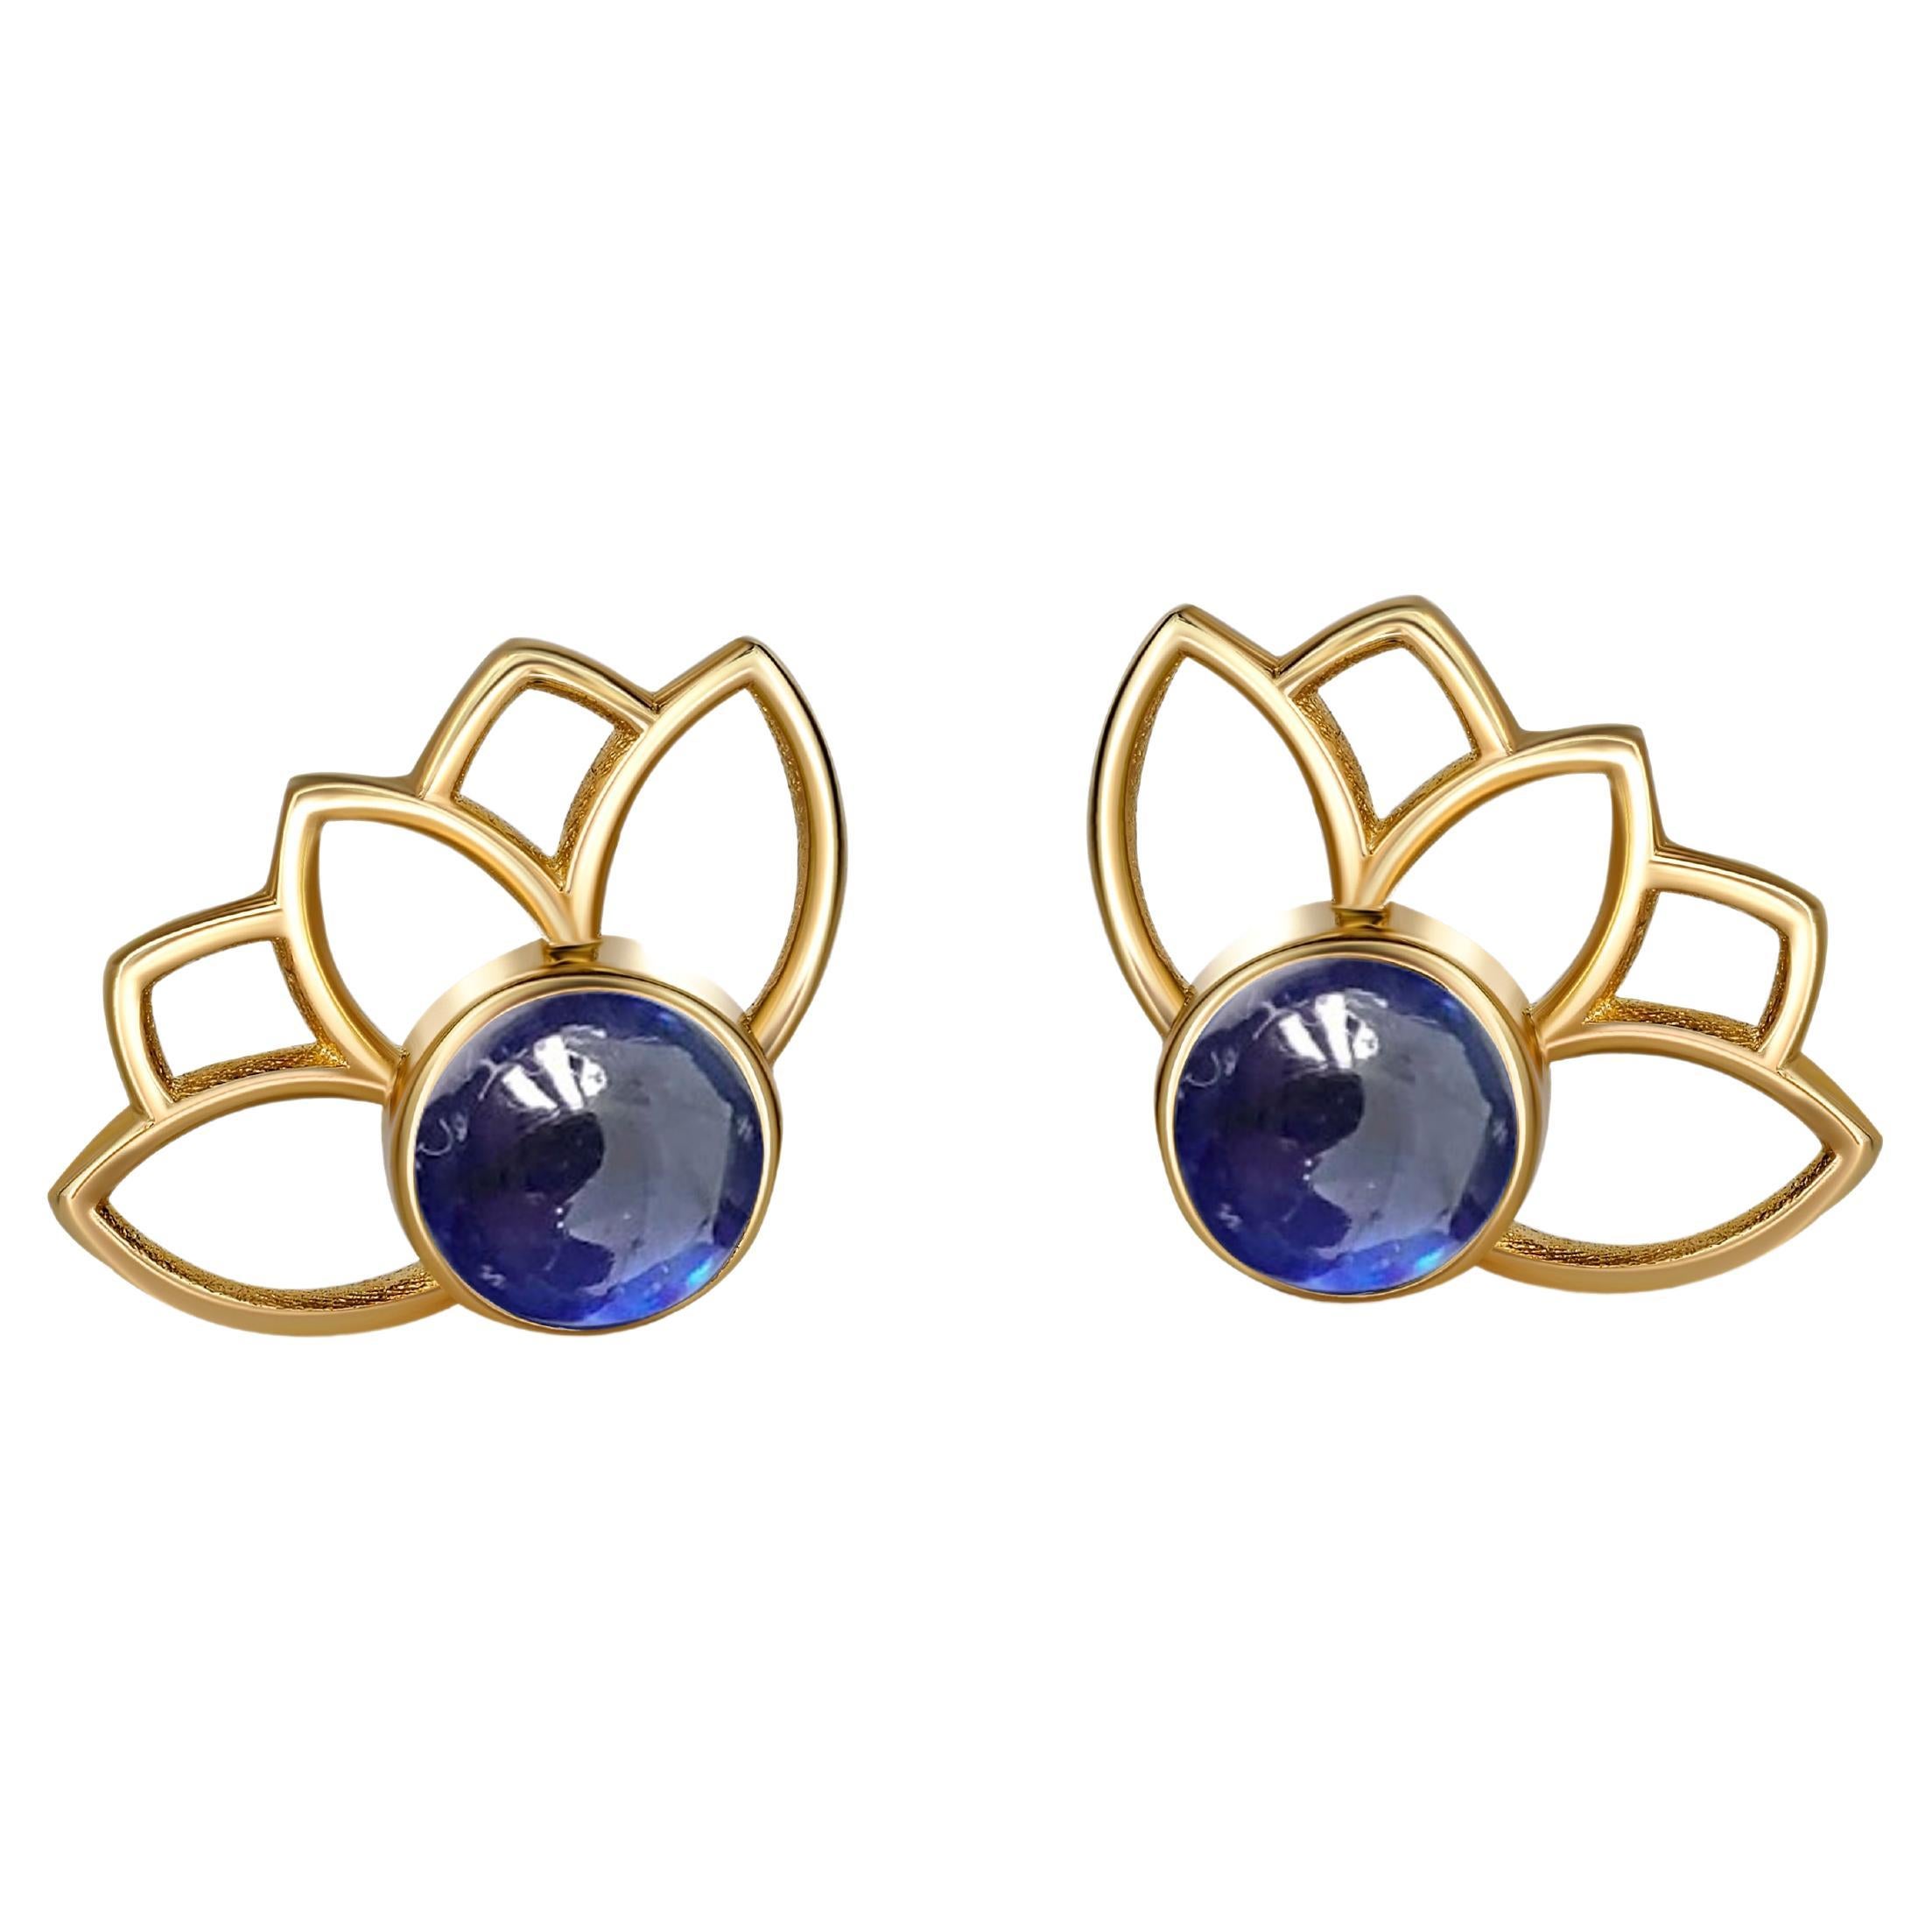 Lotus earrings studs with sapphires in 14k gold.  For Sale